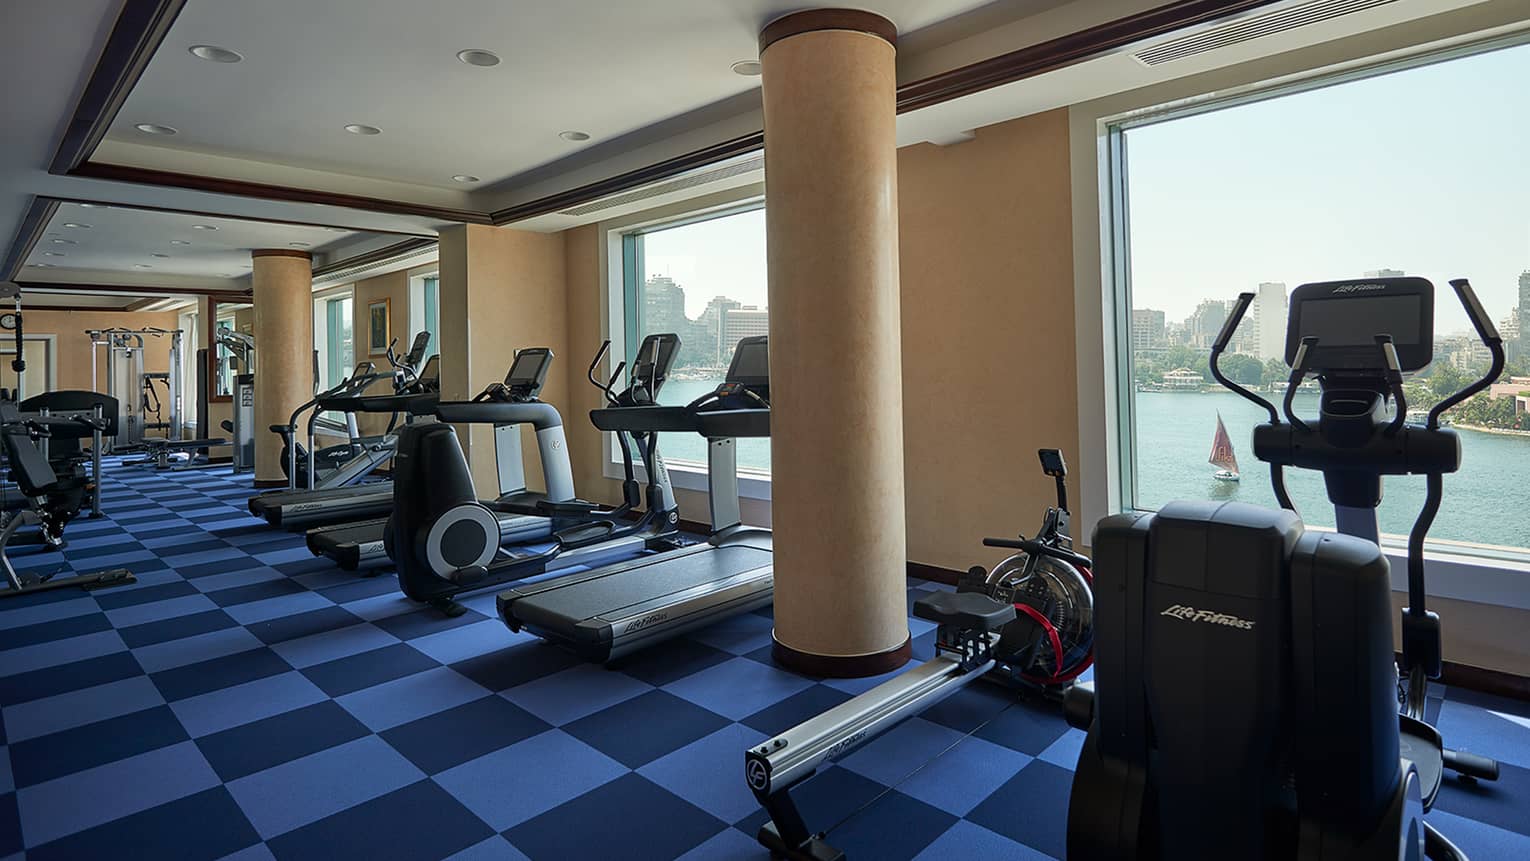 Row of cardio machines in front of window overlooking Nile river